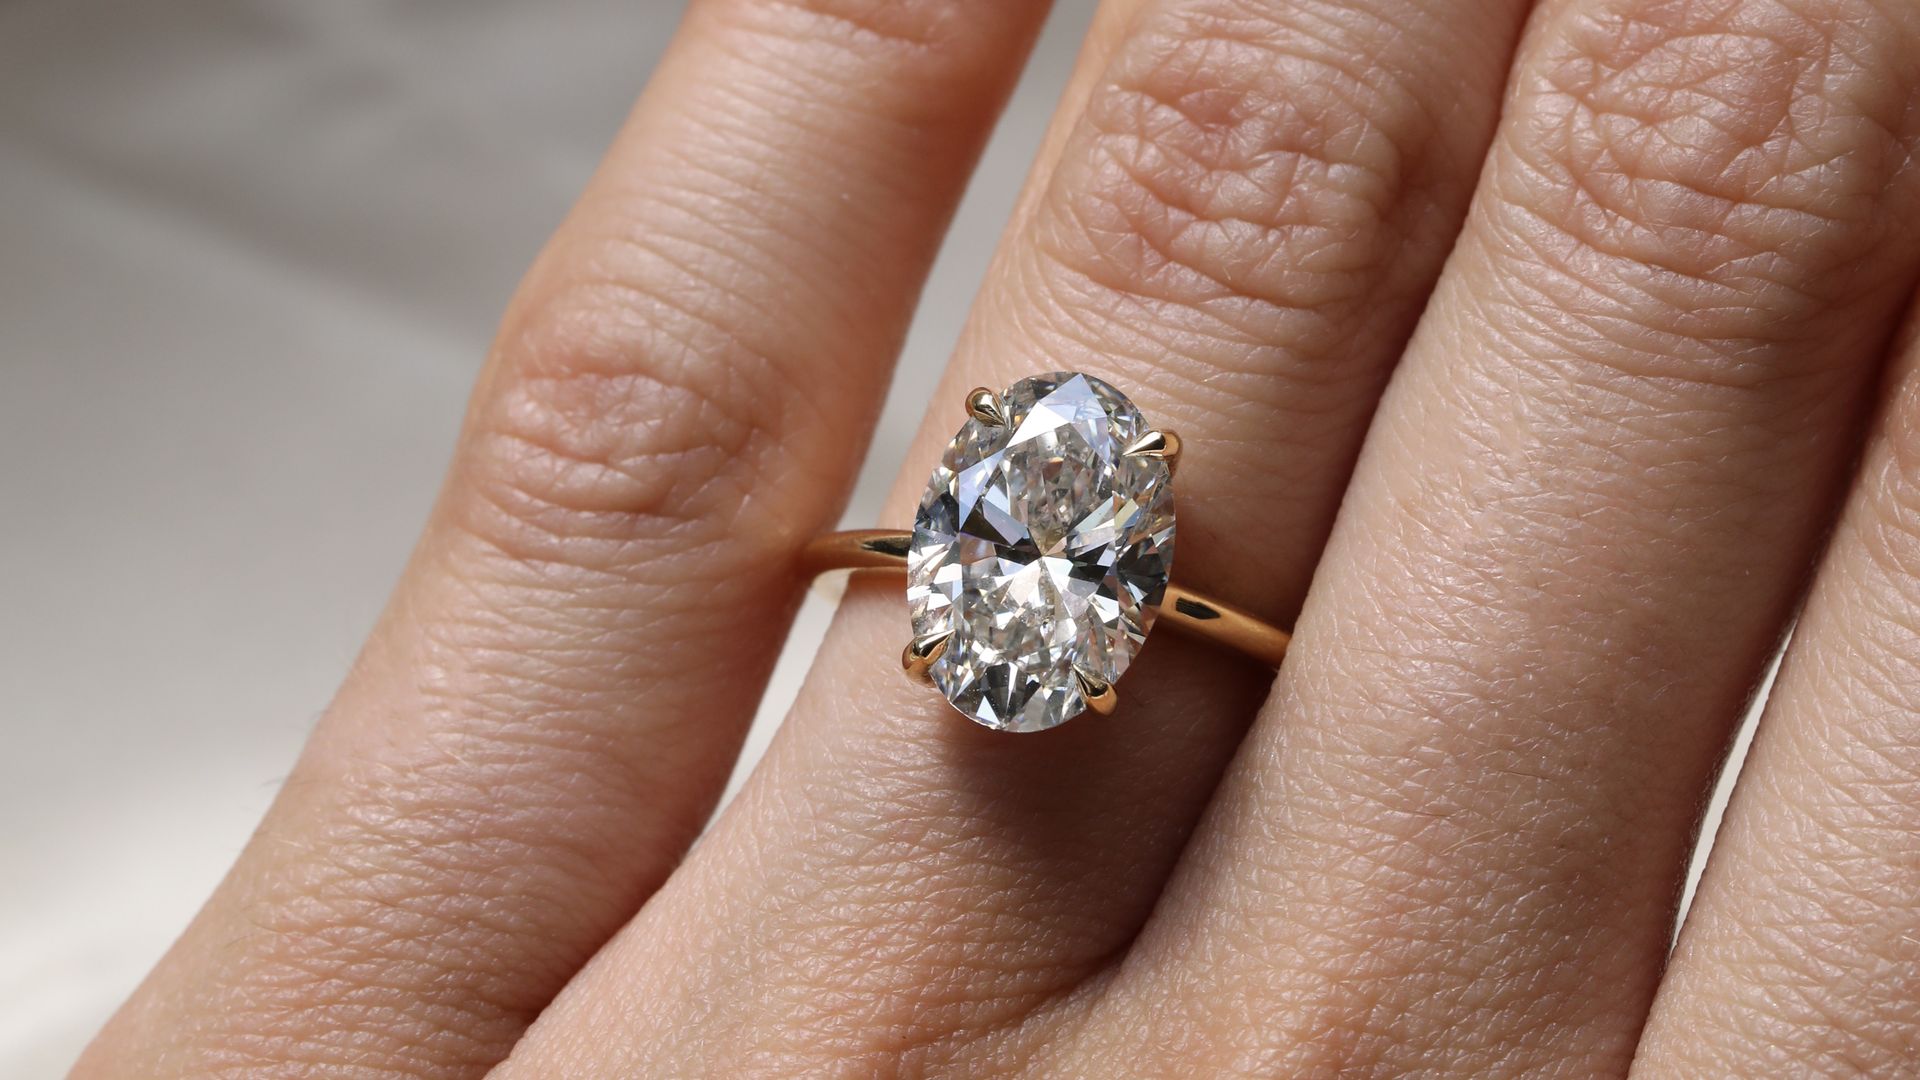 The Anatomy of a Ring - Engagement Ring Terms Explained